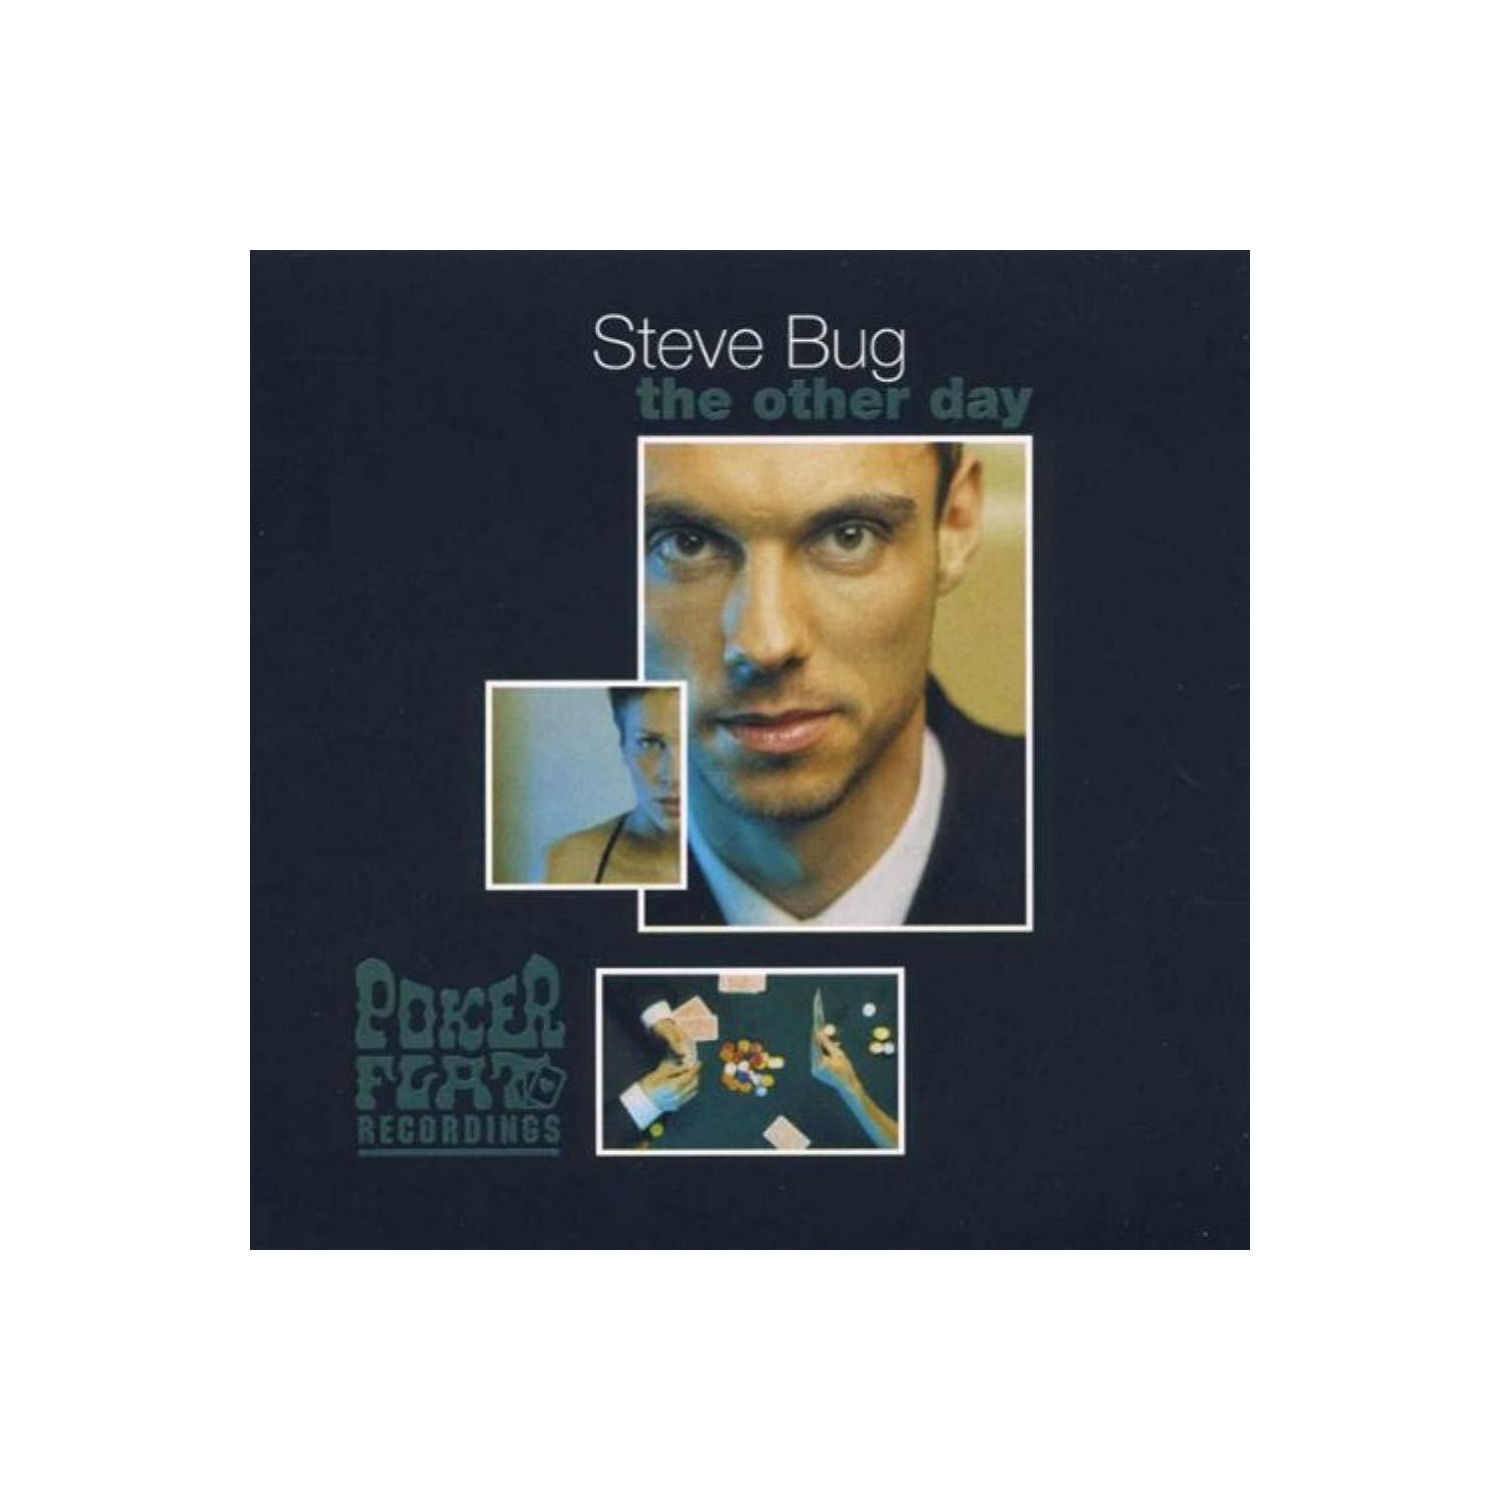 The Other Day [Audio CD] Bug, Steve